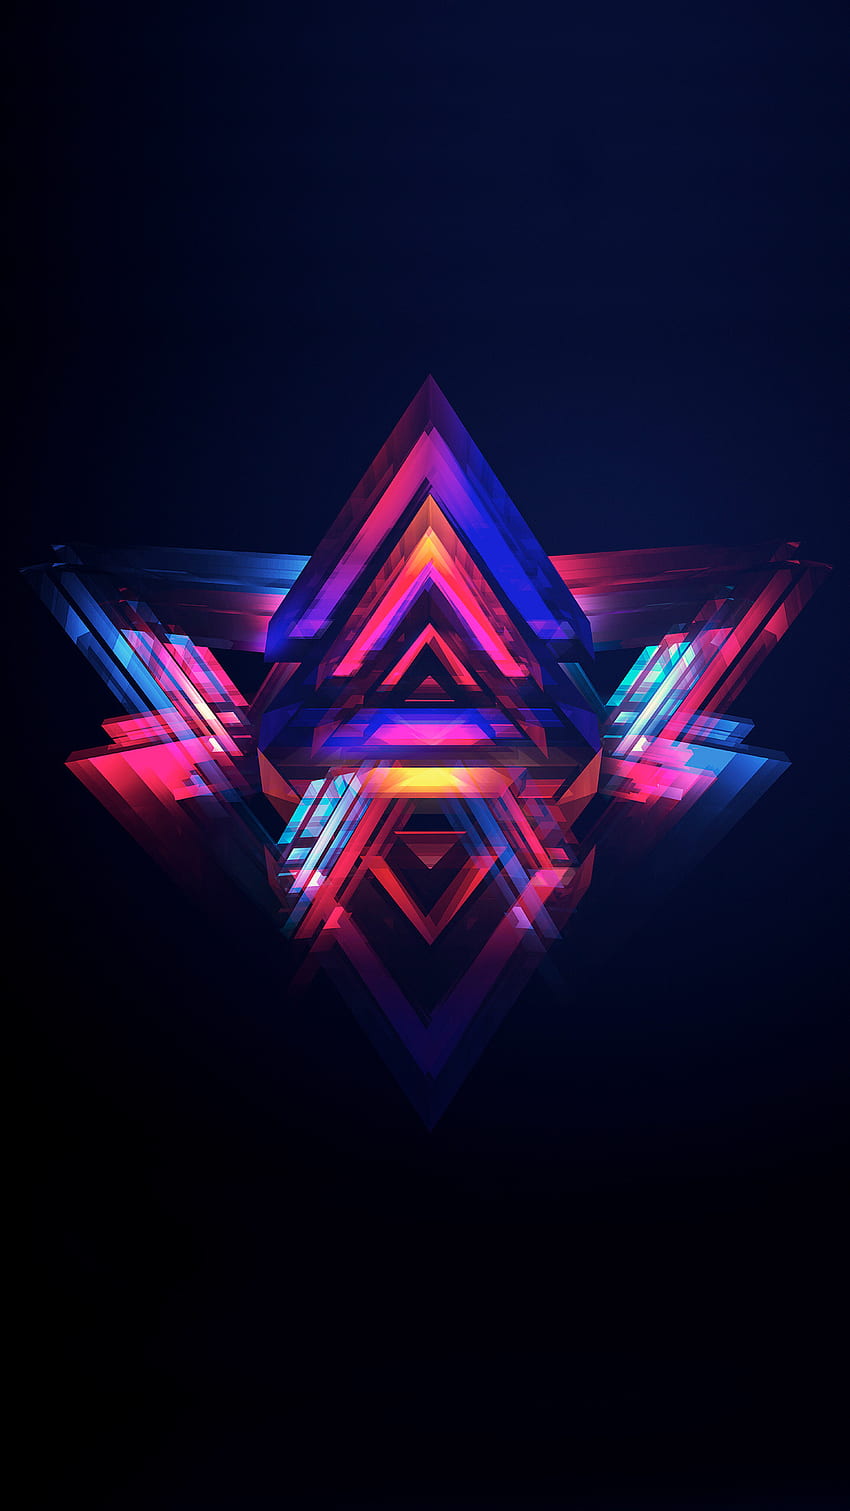 Abstract Pyramids phone by Create and share your own ringtones, videos, themes and cell phone with your friends. HD phone wallpaper